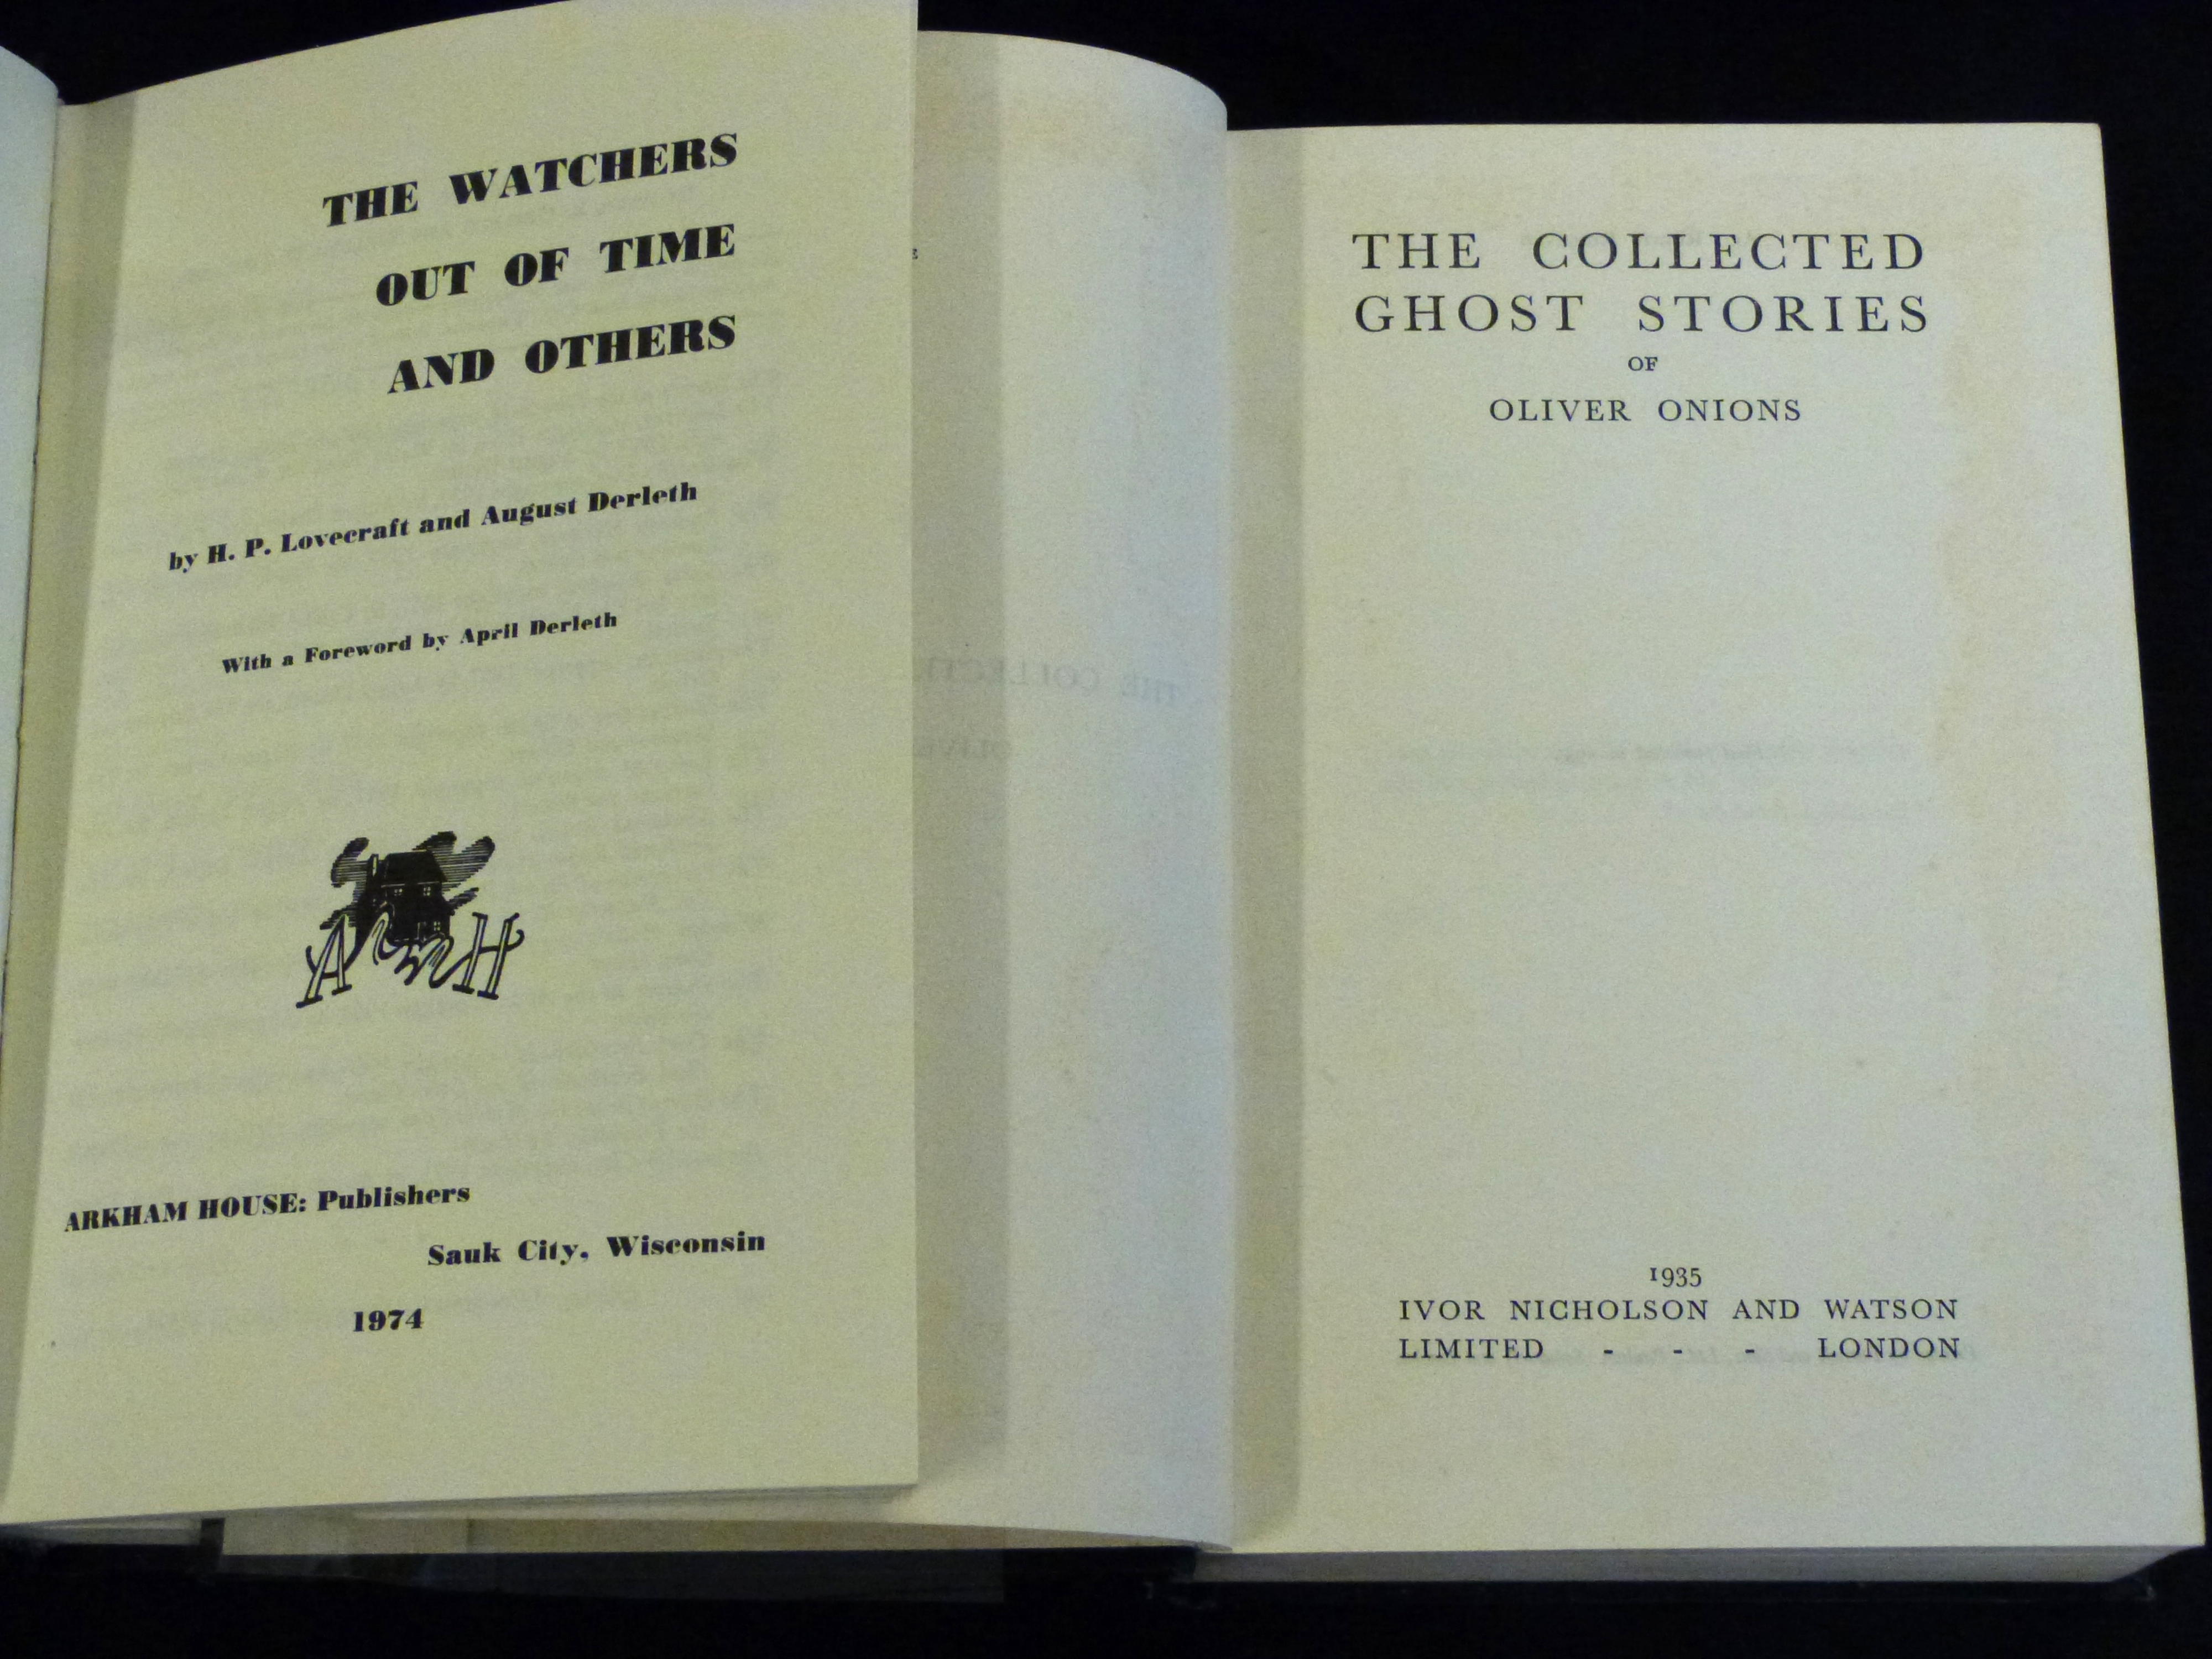 H P LOVECRAFT & AUGUST DERLETH: THE WATCHERS OUT OF TIME AND OTHERS, Wisconsin, Arkham House,